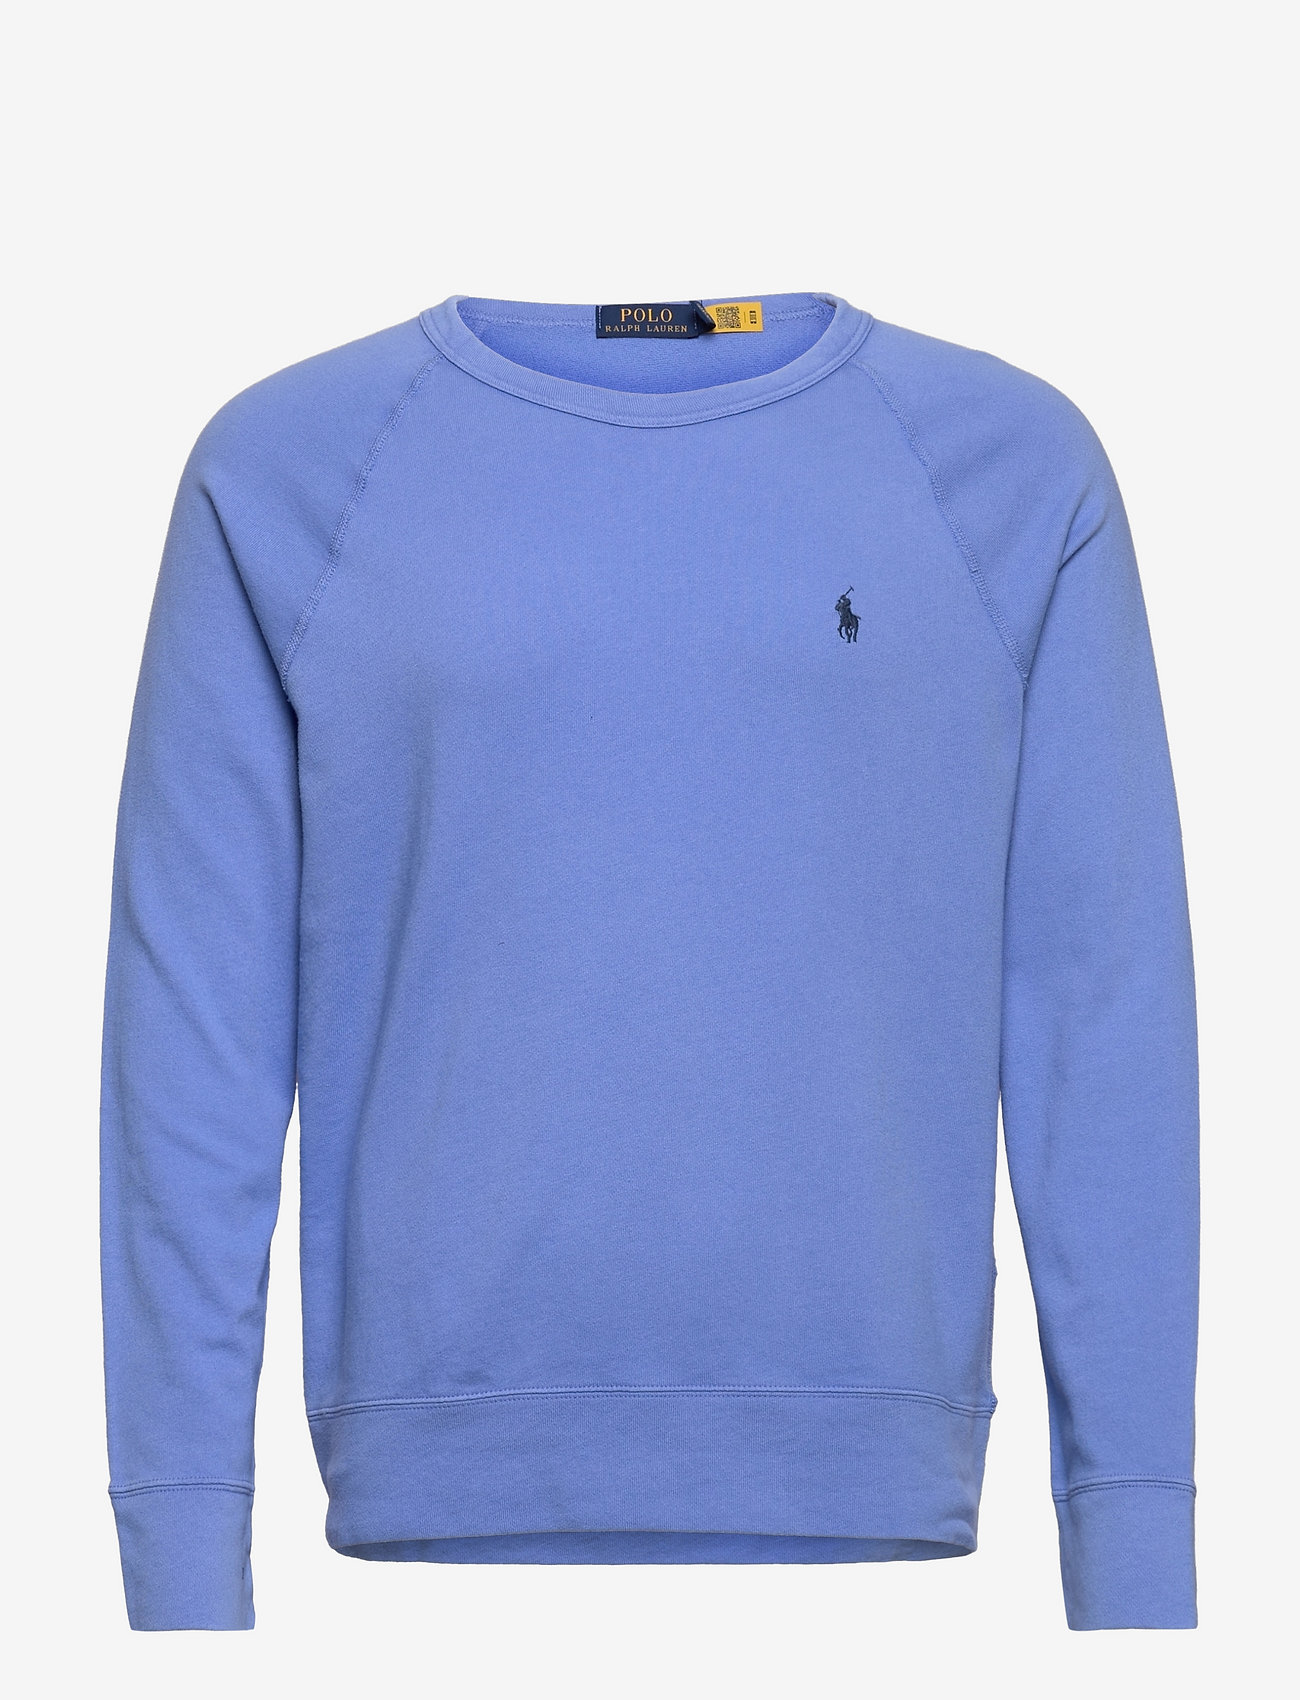 gym and workout clothes Mens Activewear Polo Ralph Lauren Cotton Crew Neck Sweatshirt in Blue for Men gym and workout clothes Polo Ralph Lauren Activewear 